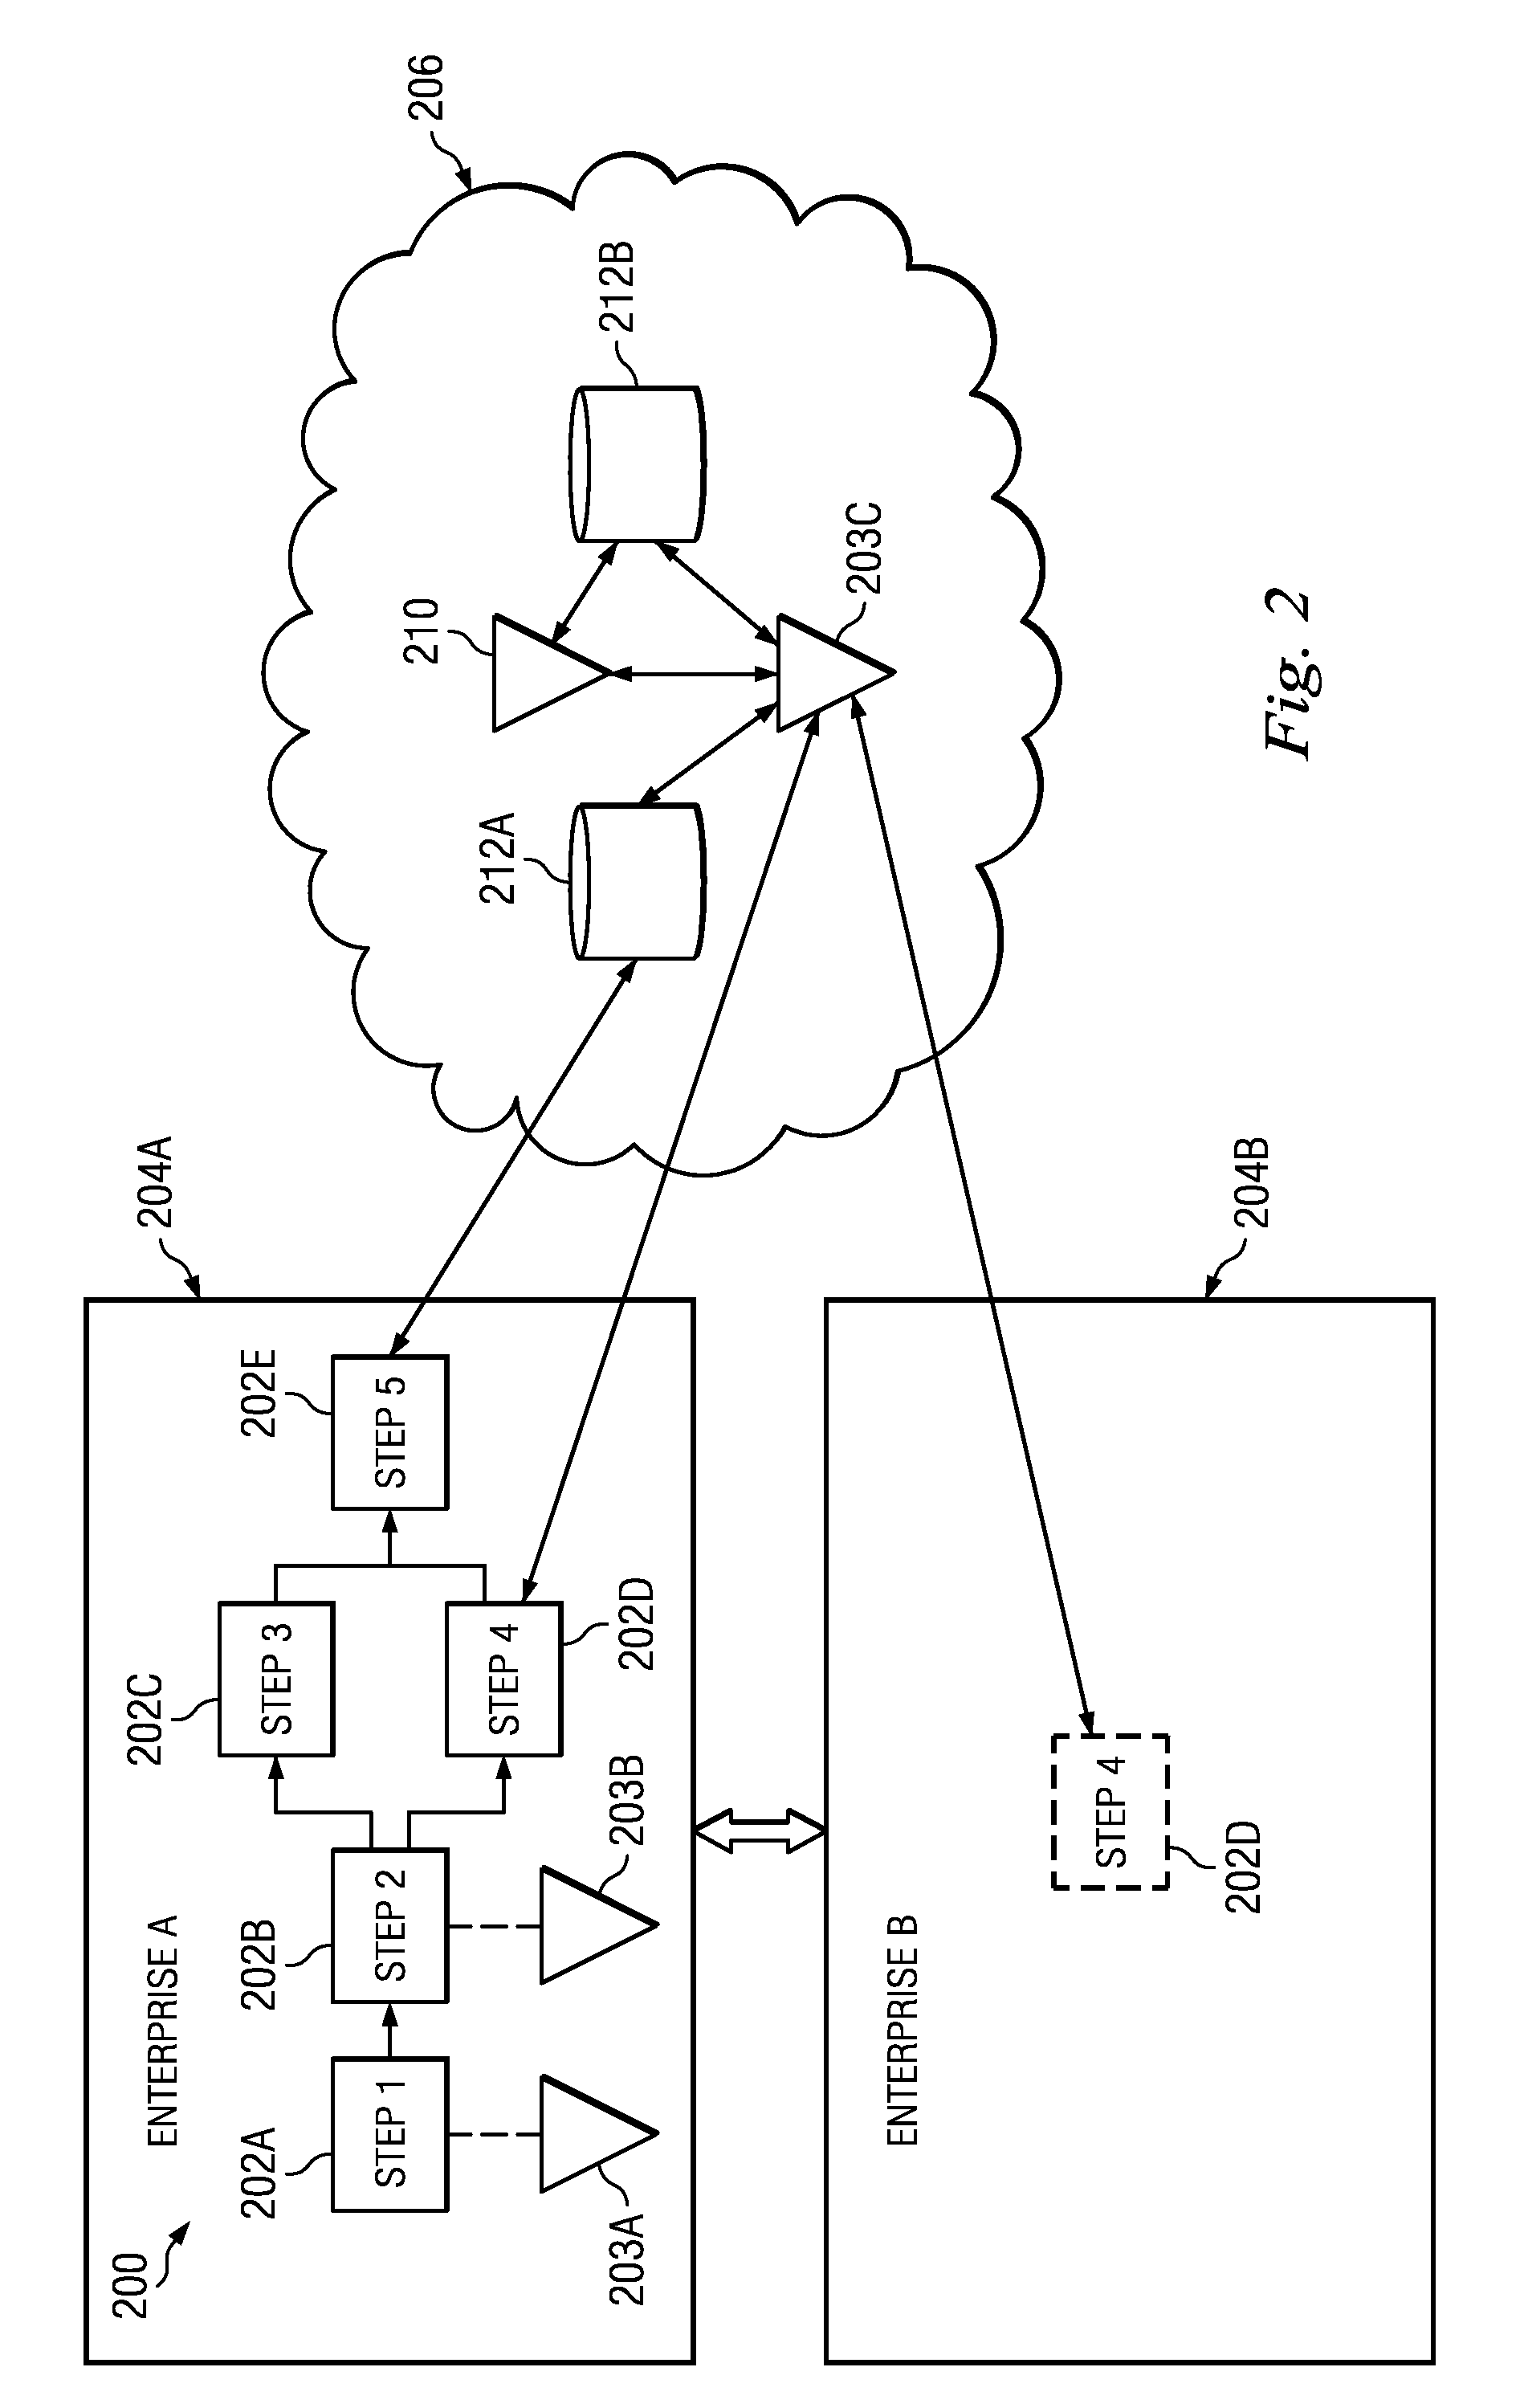 System and method for implementing a cloud workflow